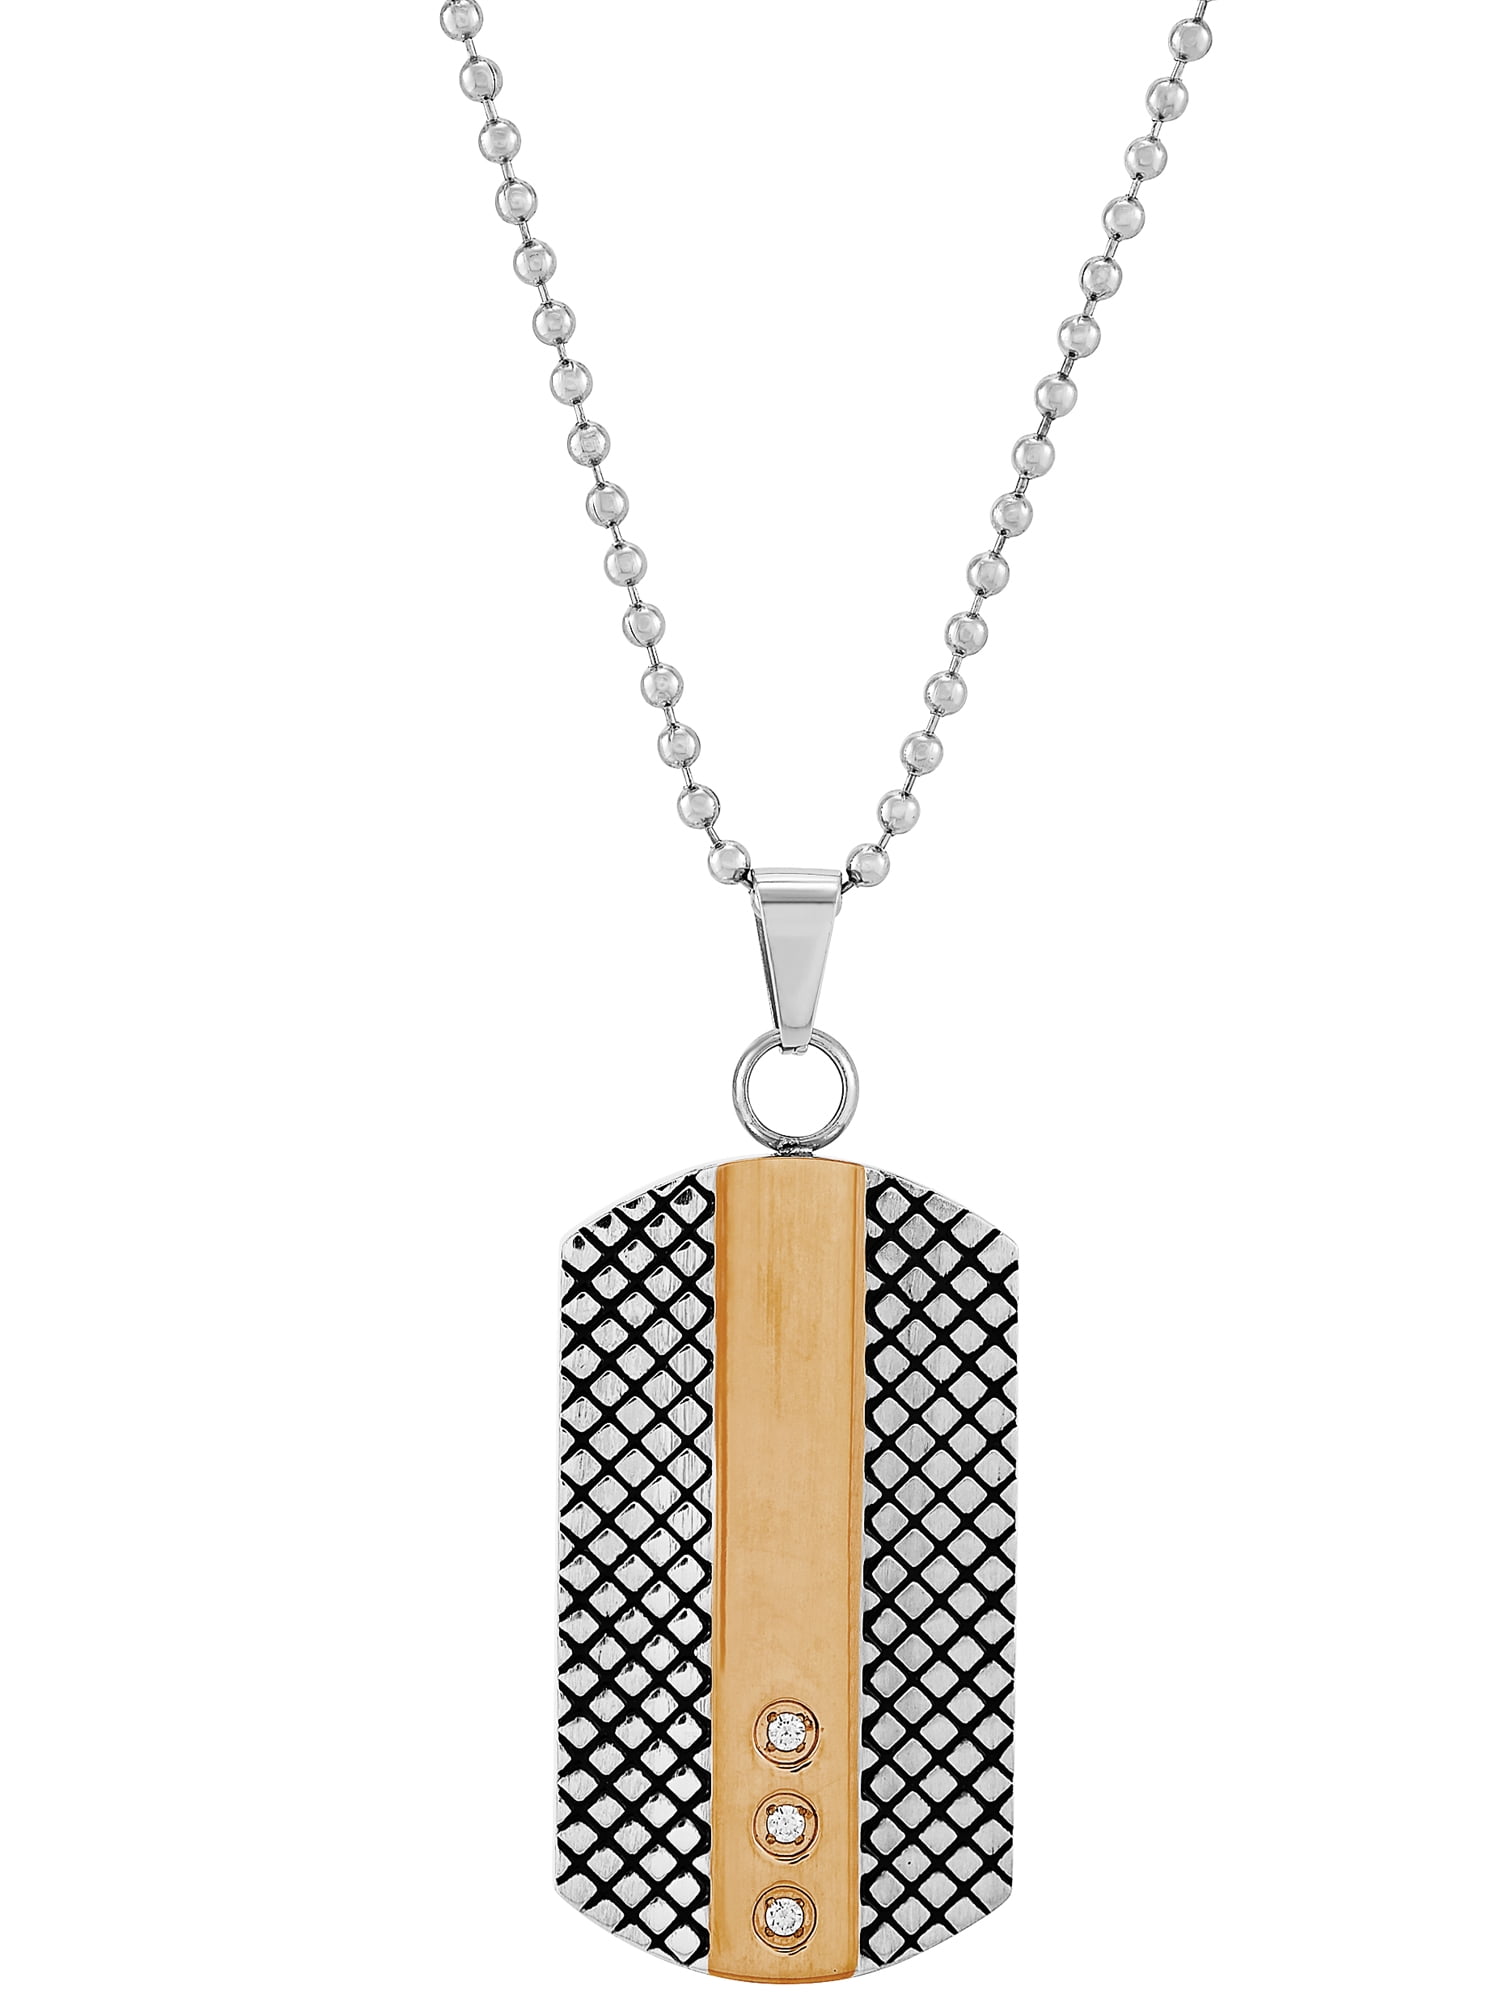 stainless steel dog tag pendant